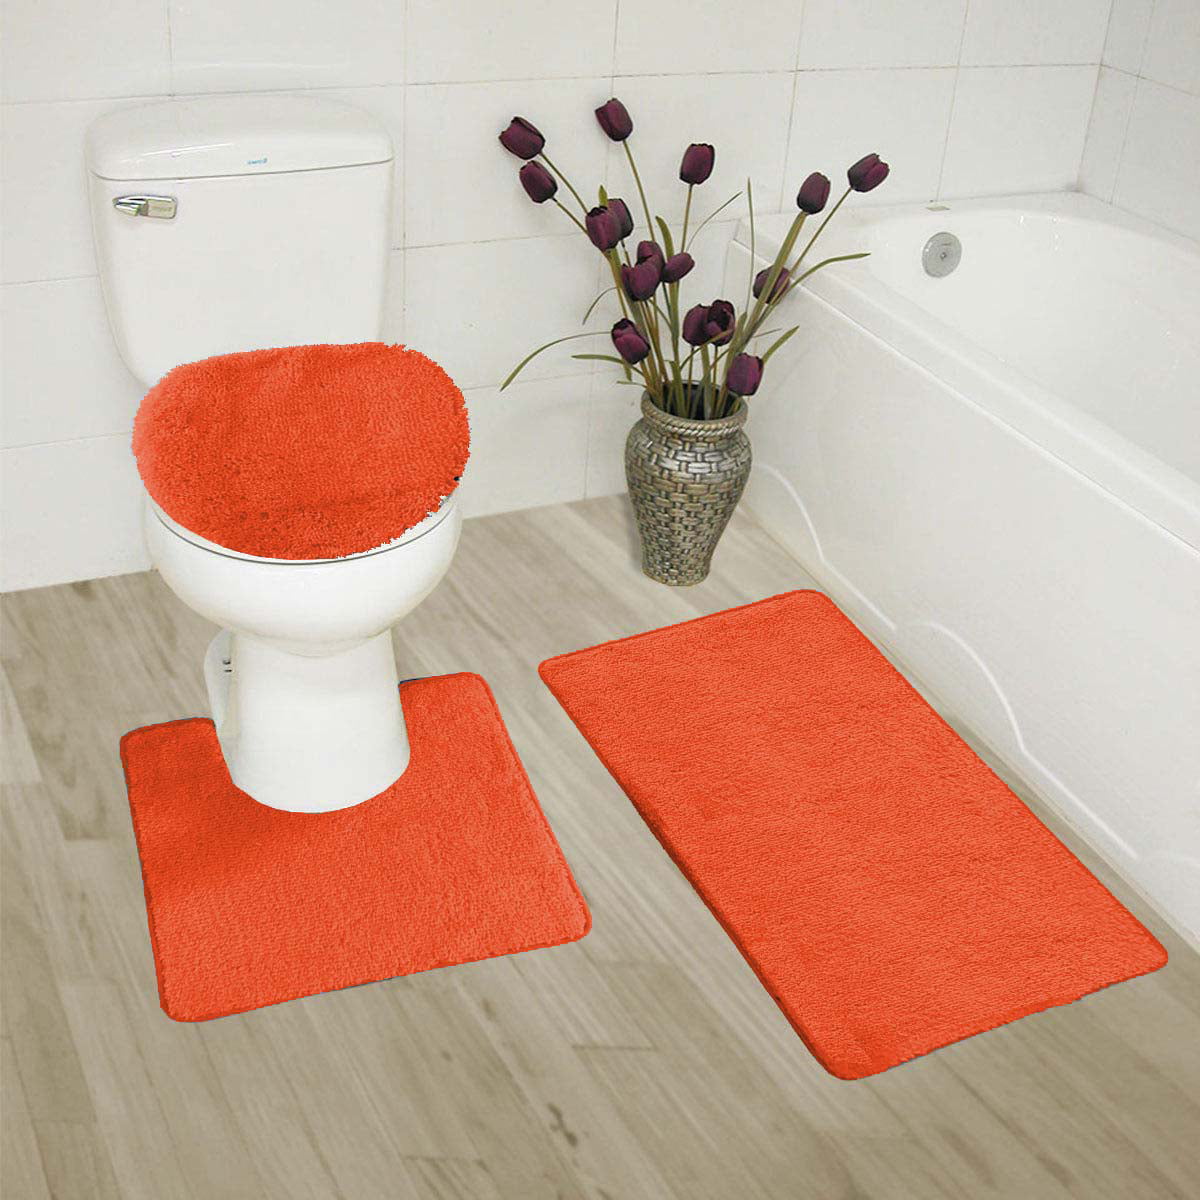 3Piece Mixed Shiny Chenille Bath Mats Set Made with super soft Microfiber TURQUO 